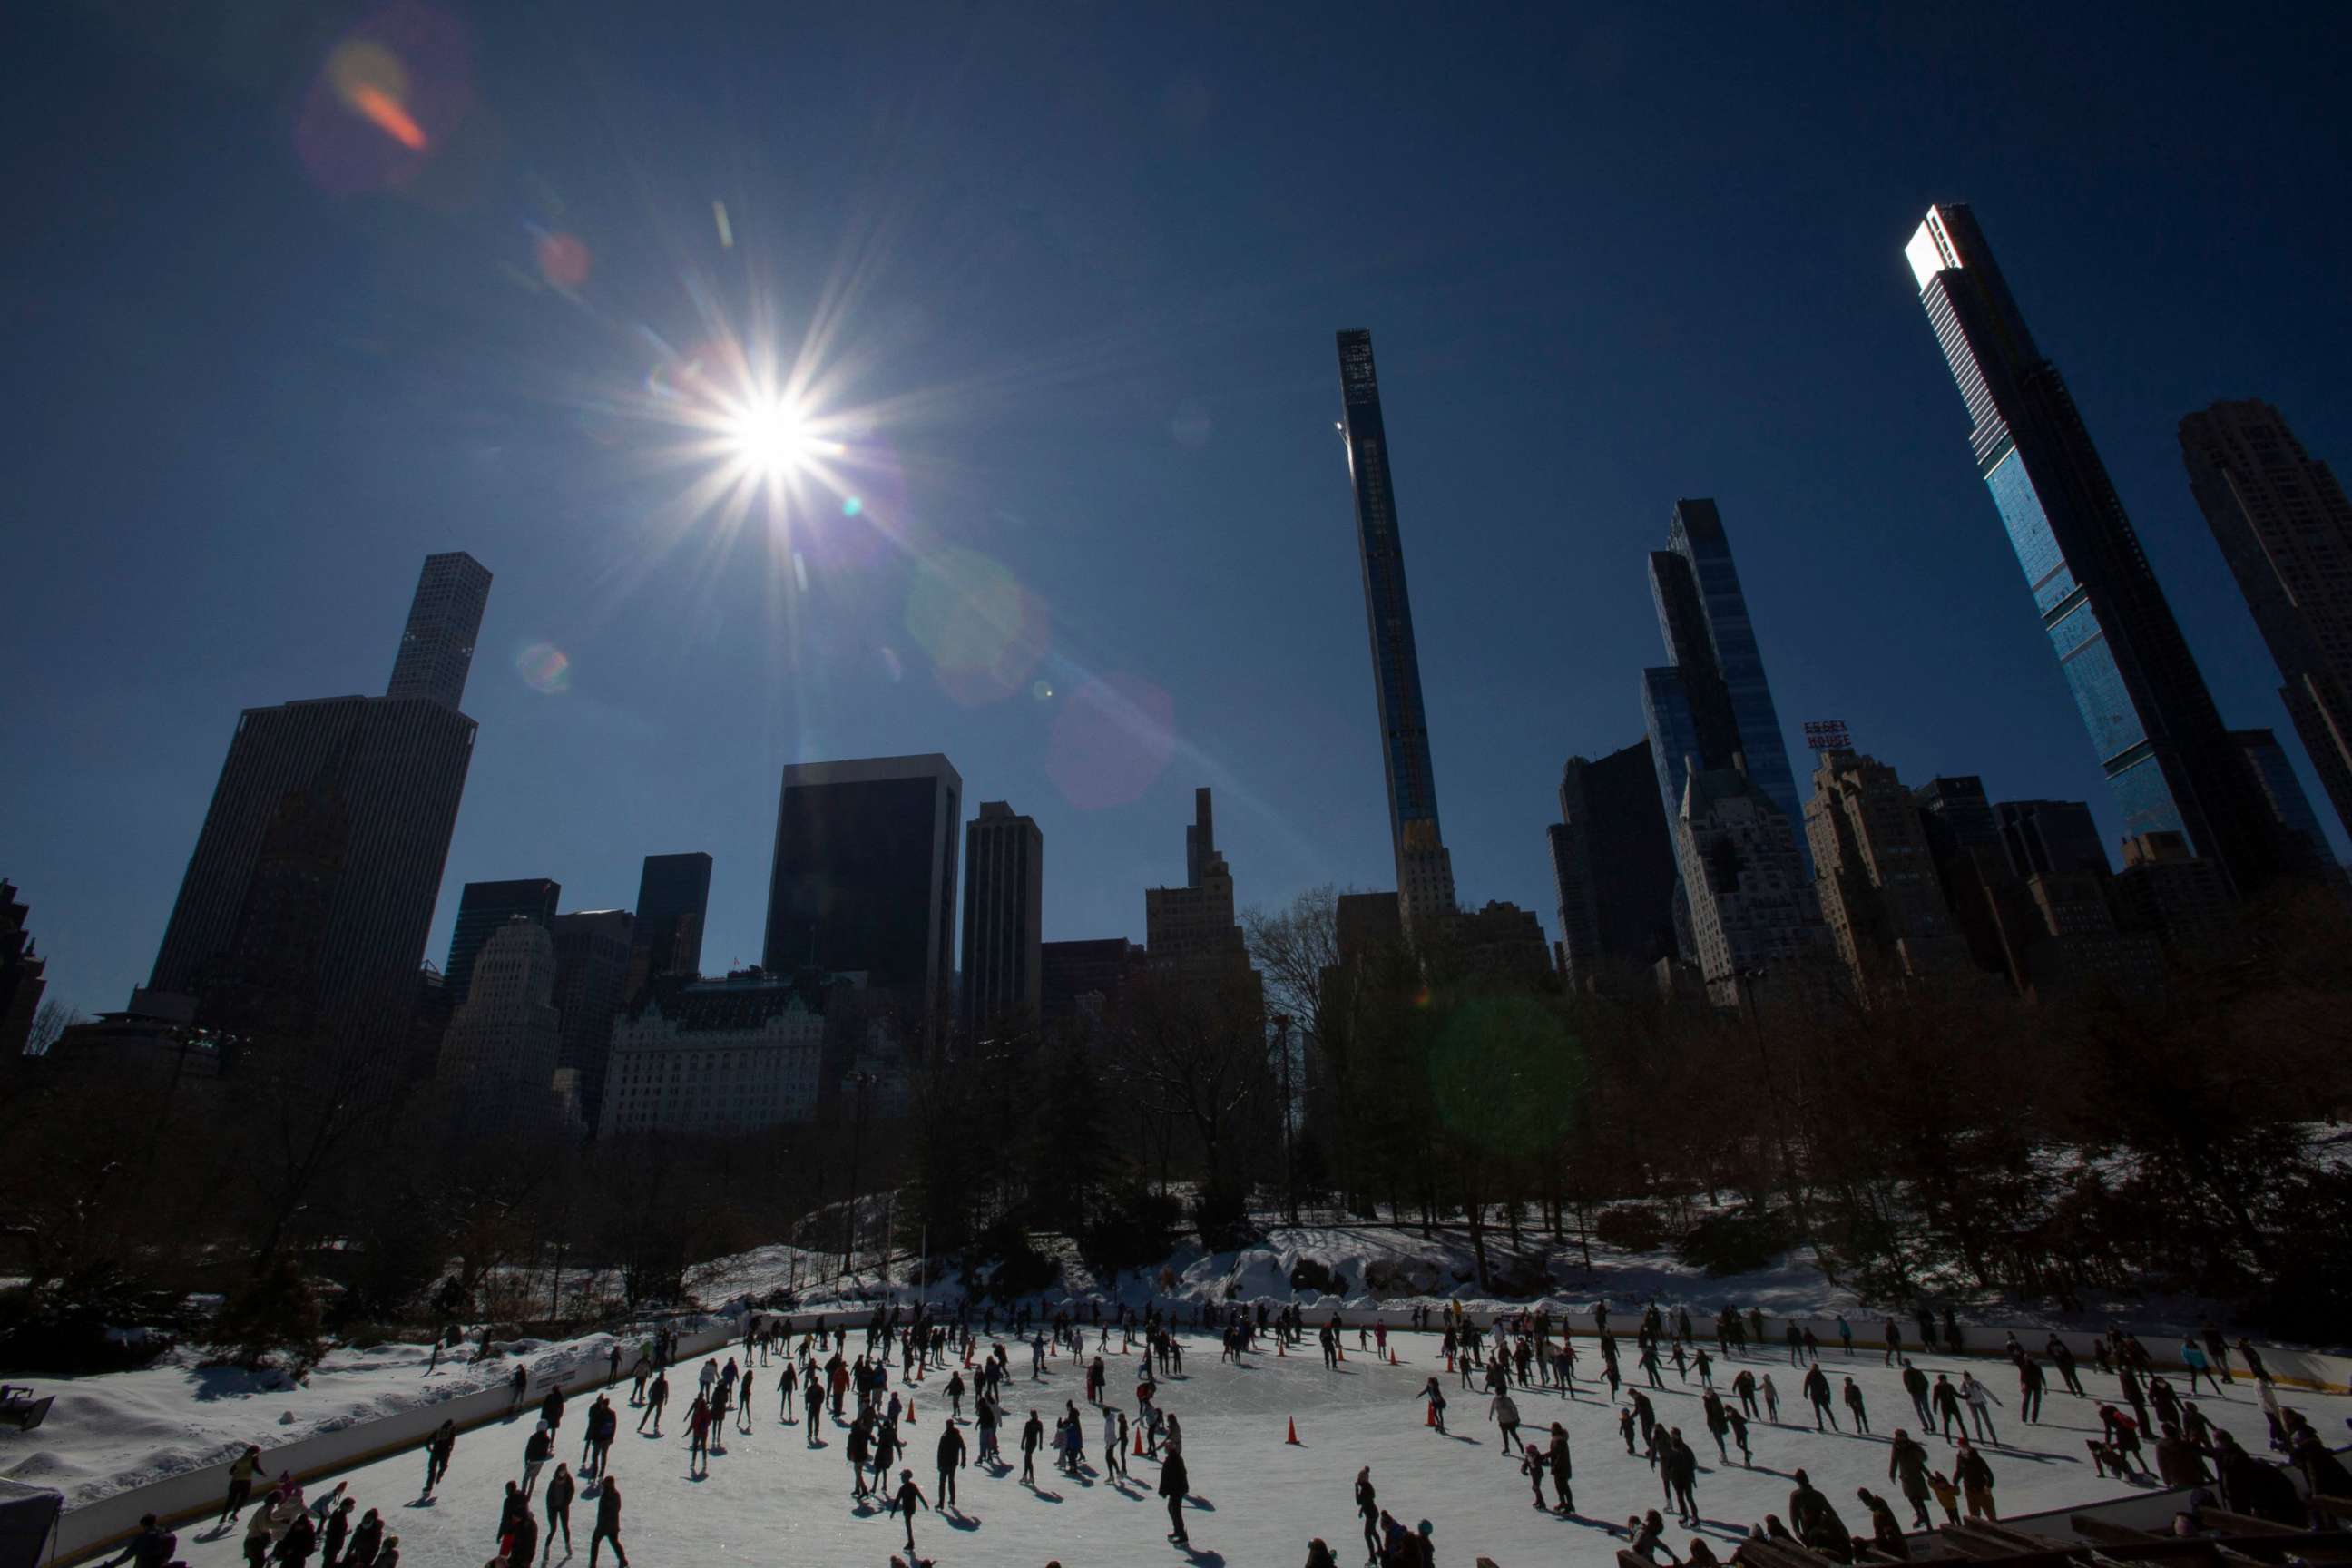 PHOTO: TOPSHOT - People visit the Wollman ice skating rink before it closes at the end of the day in Central Park in New York City on Feb. 21, 2021. 